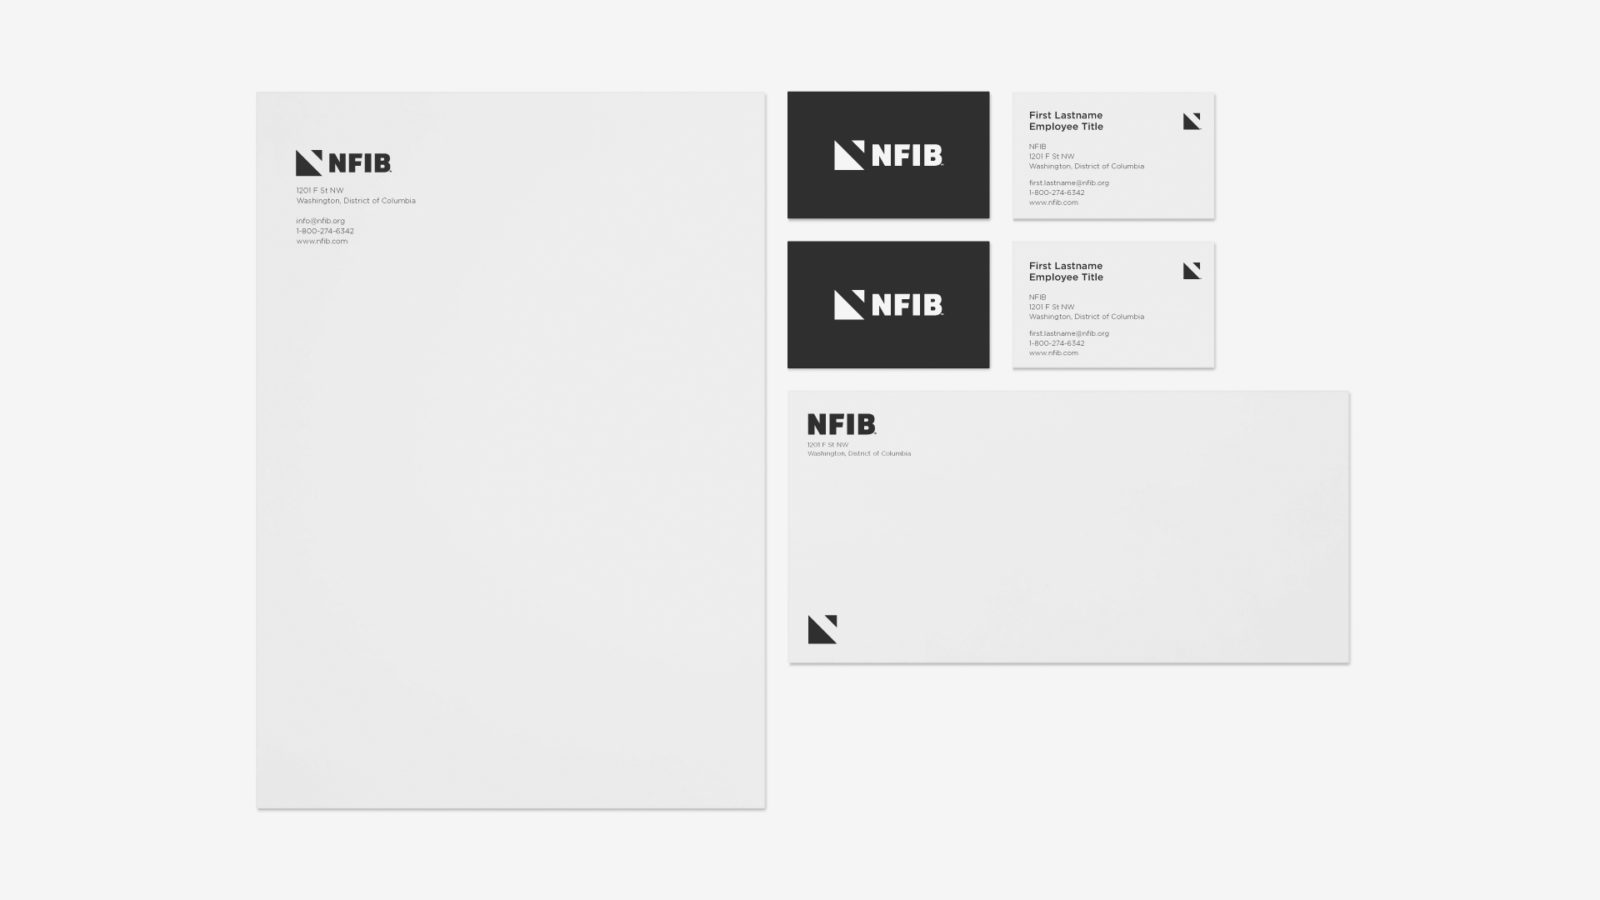 NFIB Independent and Small Business Association Branding and Strategy Stationery